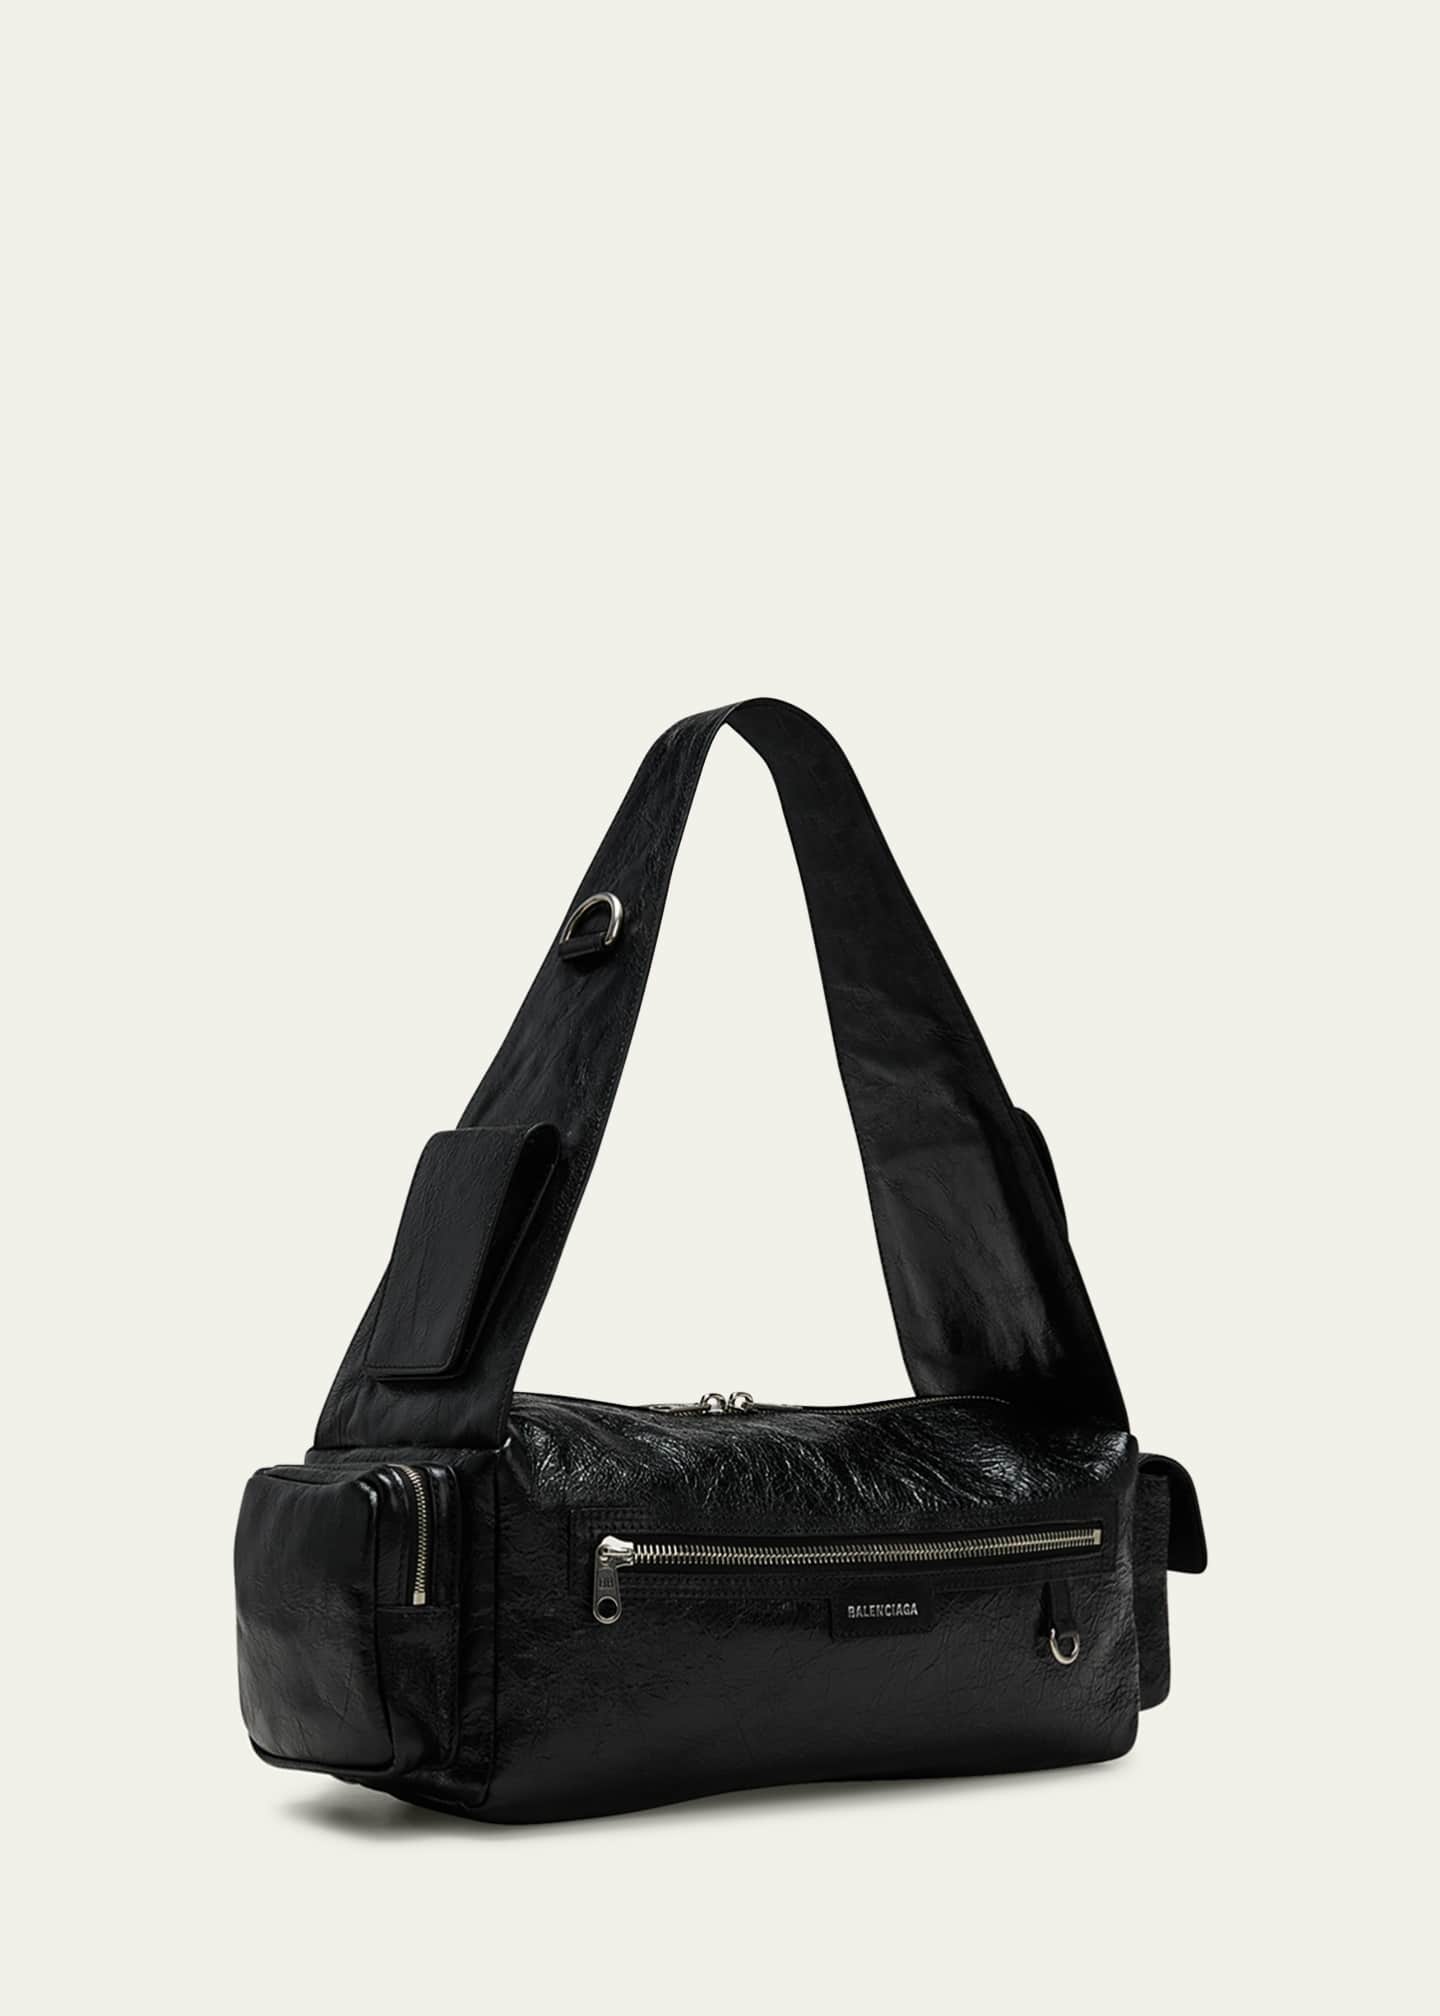 TOP☆【Authentic】LV Sling Bag for Men and Women on Sale Original